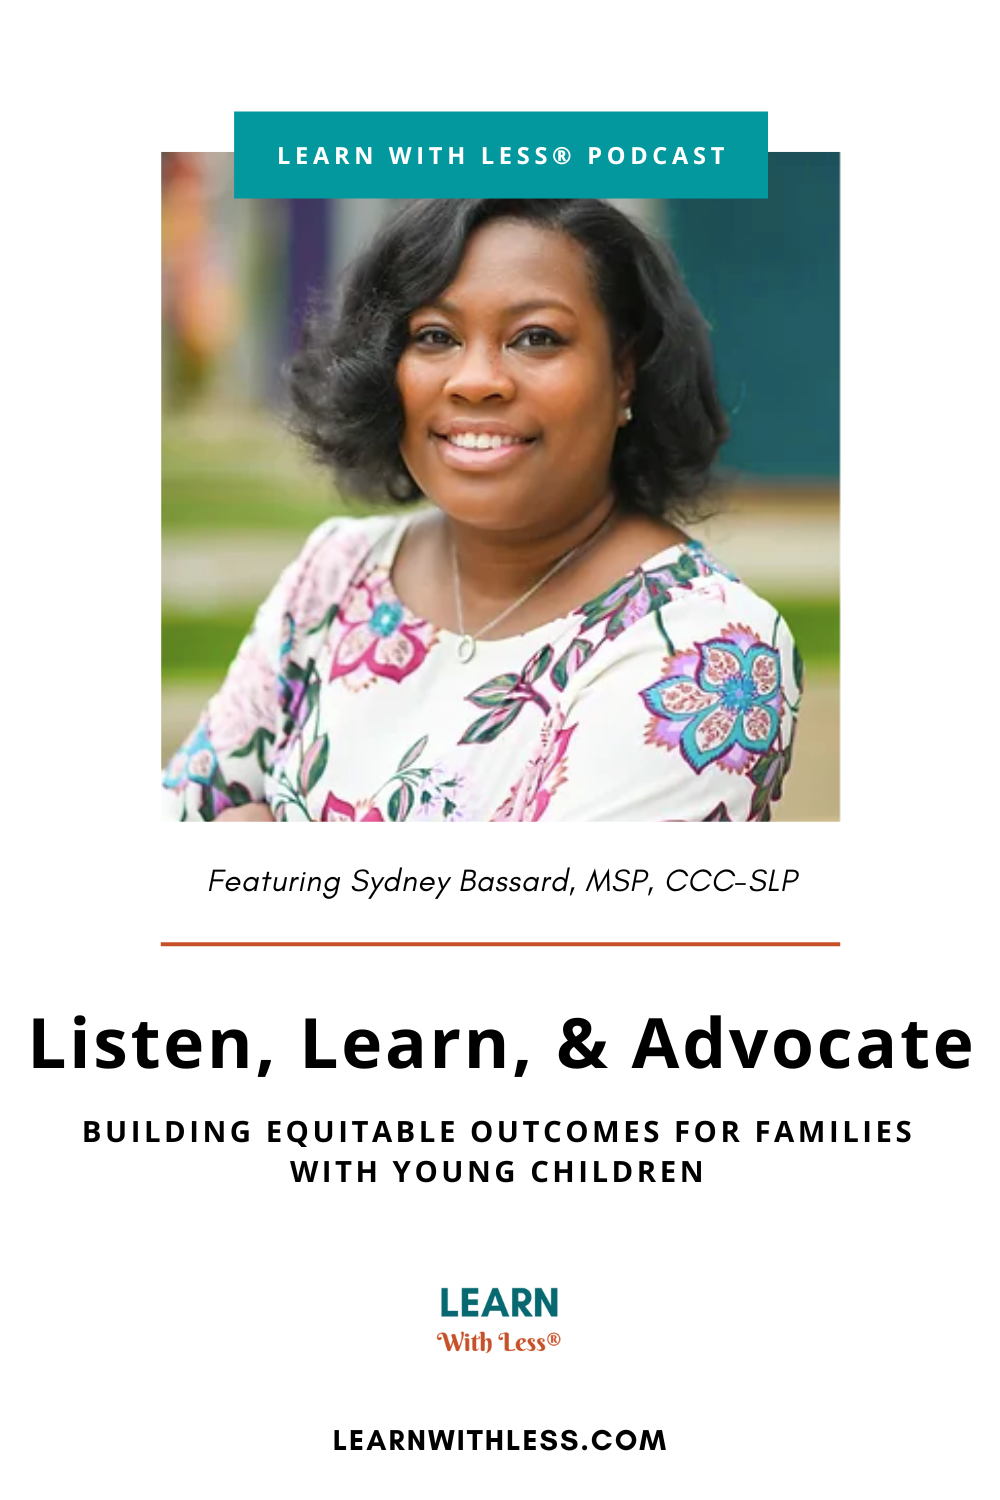 Listen, Learn, and Advocate: Support New Families, with Sydney Bassard